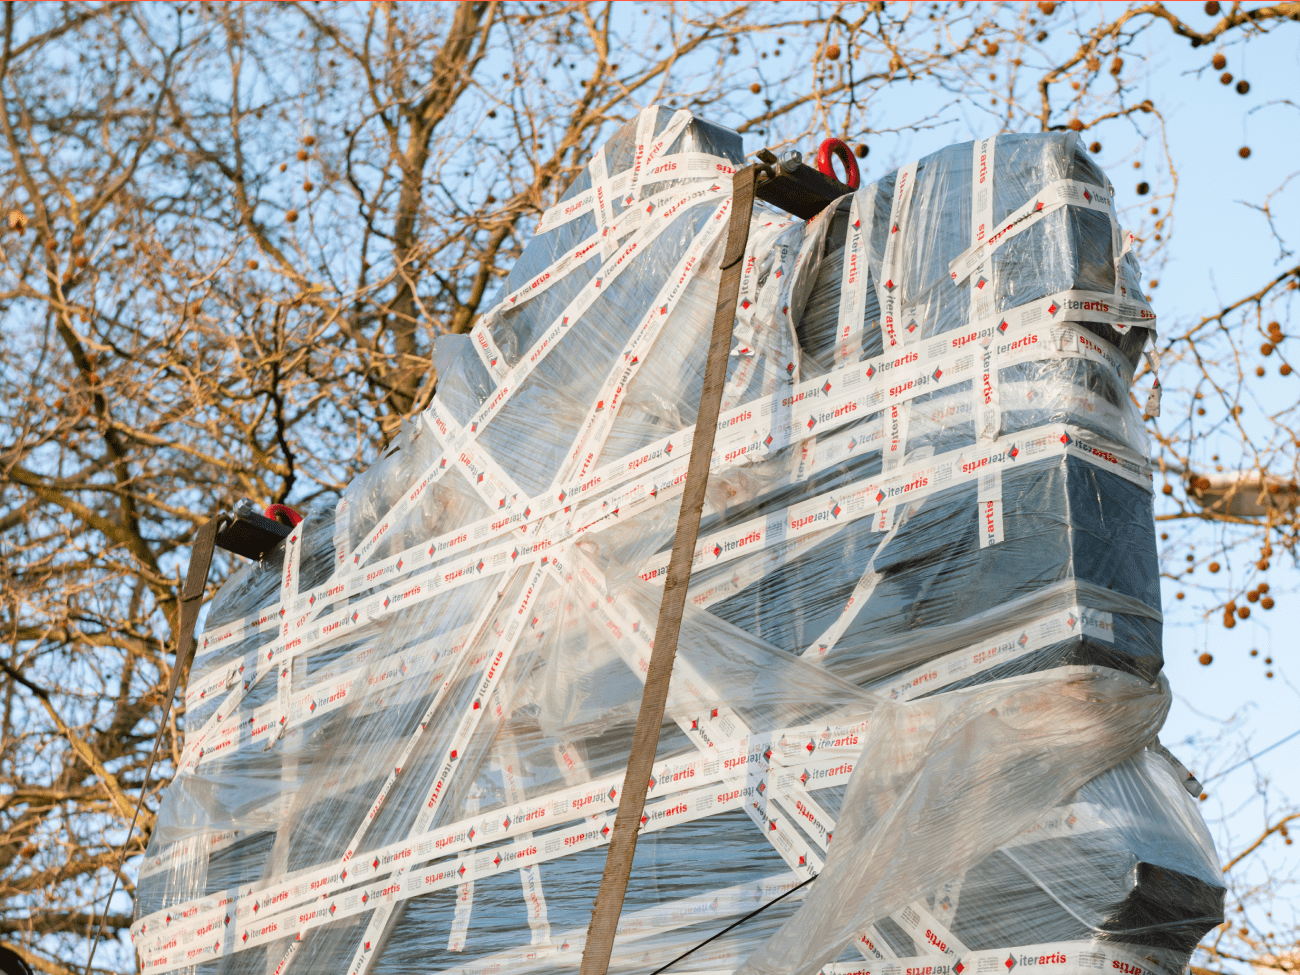 Crozier's team facilitated a craned installation of VHILS's three-ton sculpture, from his project 'Annihilation.'